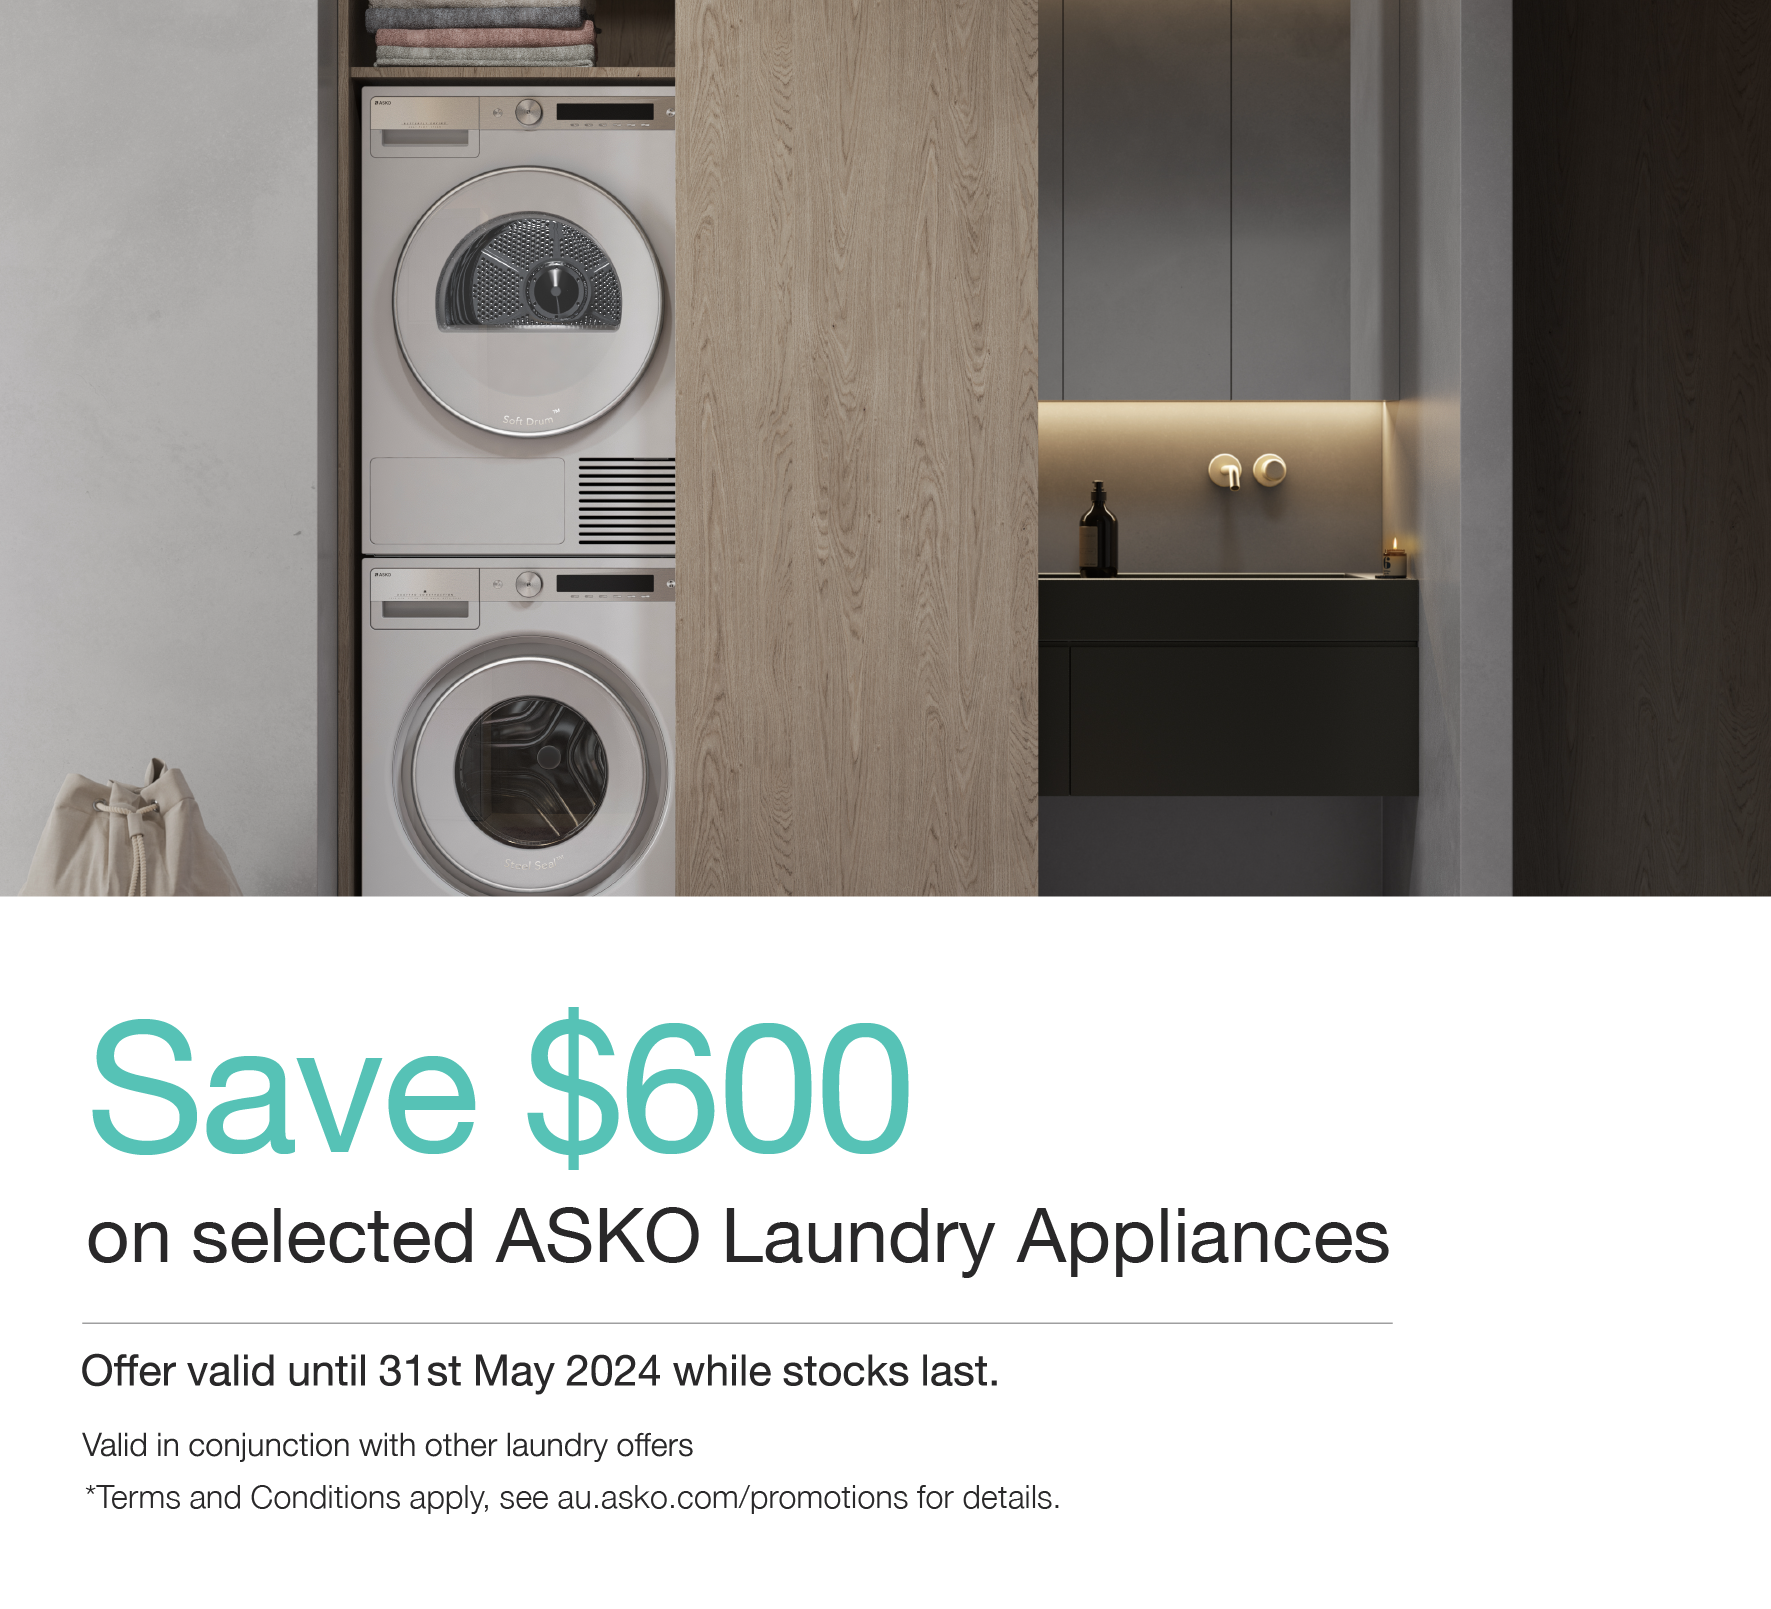 Save Up To $600 on Selected ASKO Washing Machines